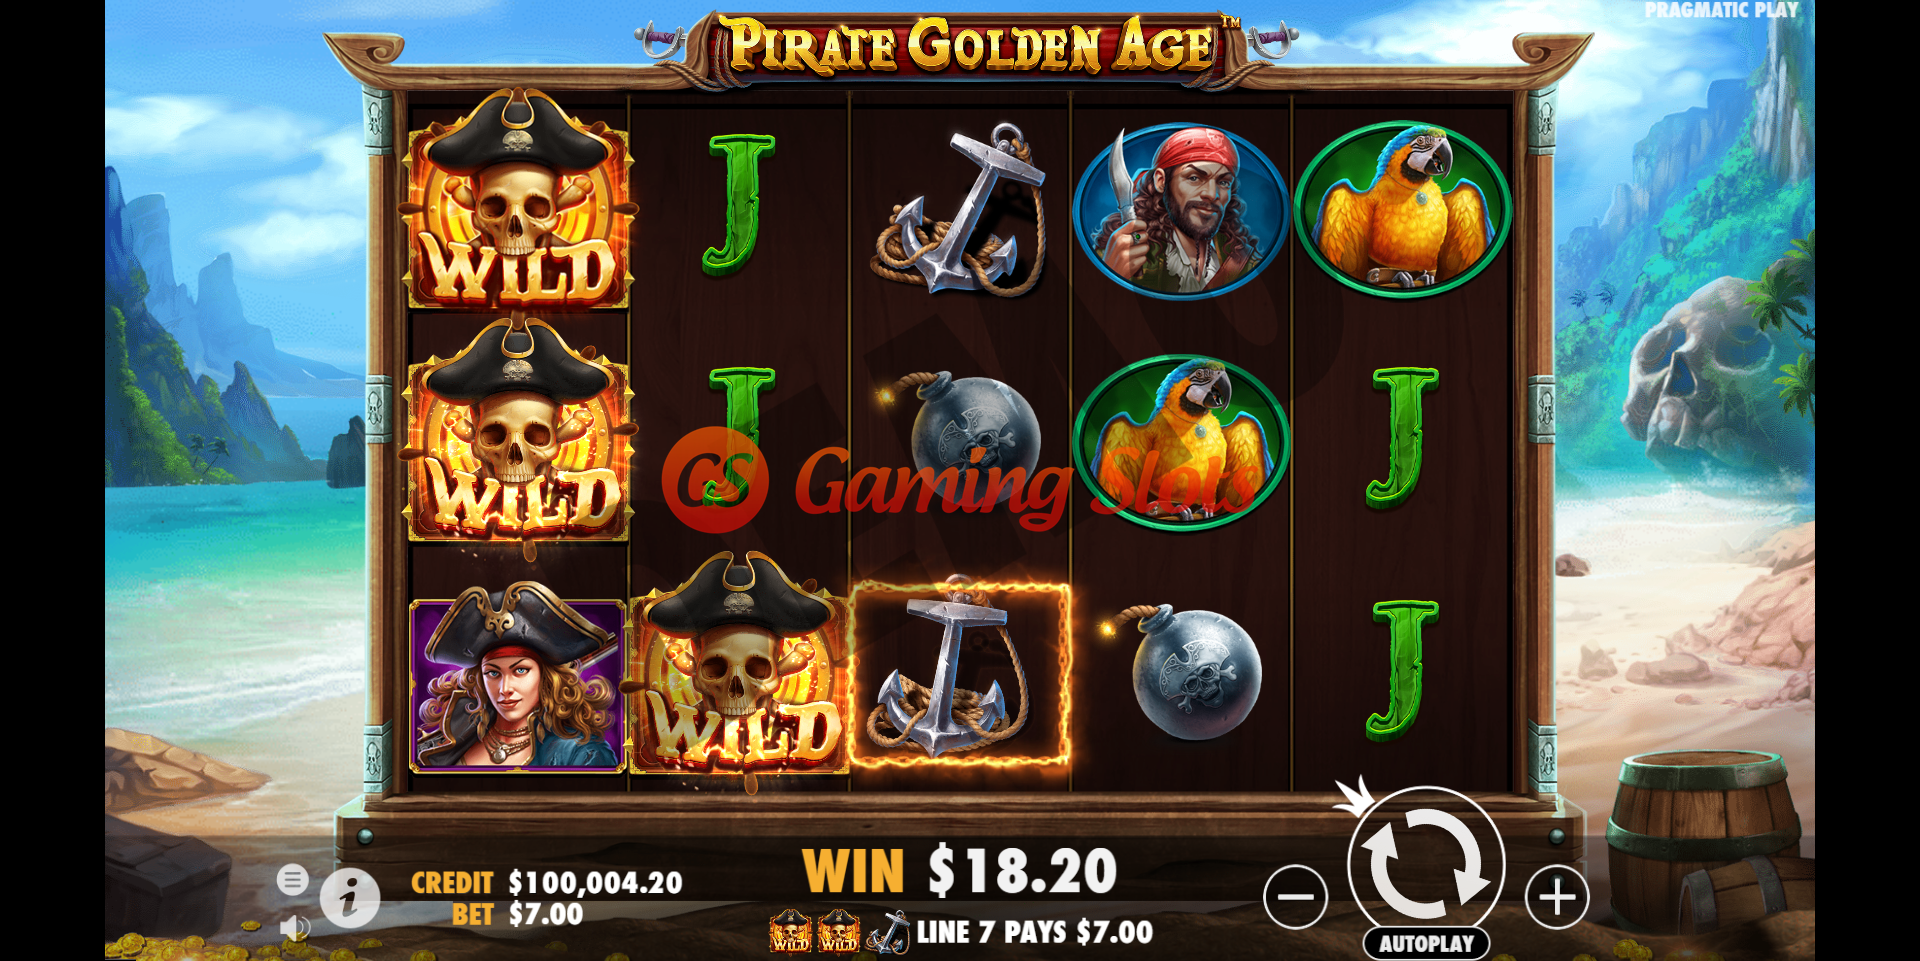 Base Game for Pirate Golden Age slot from Pragmatic Play